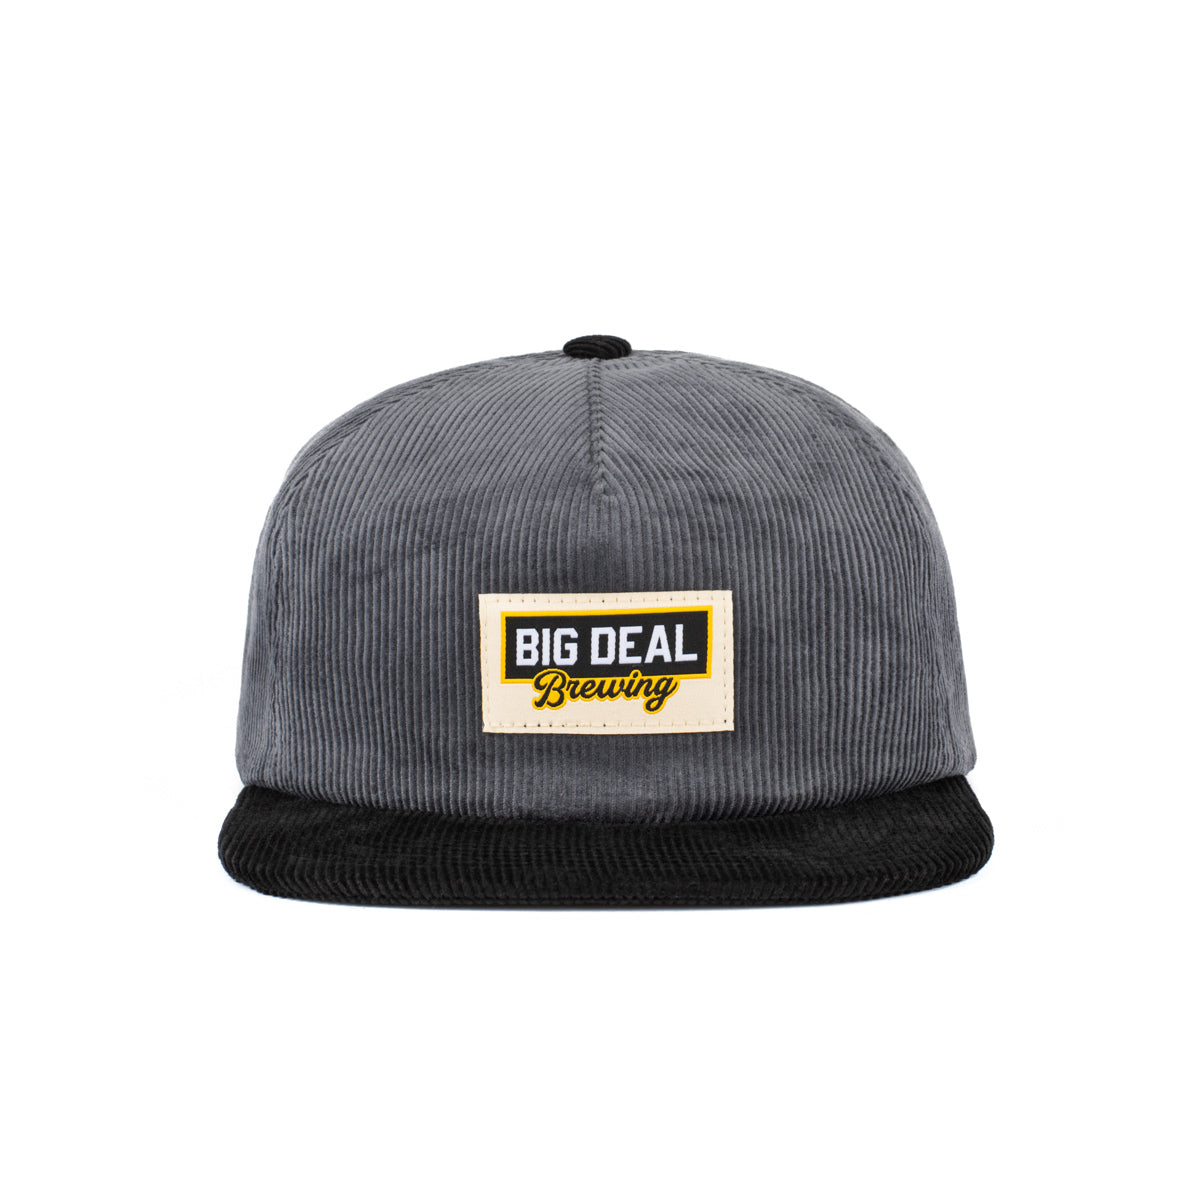 Big Deal Brewing Corduroy Hat-Hats-Big Deal Brewing-Grey-One Size-Barstool Sports